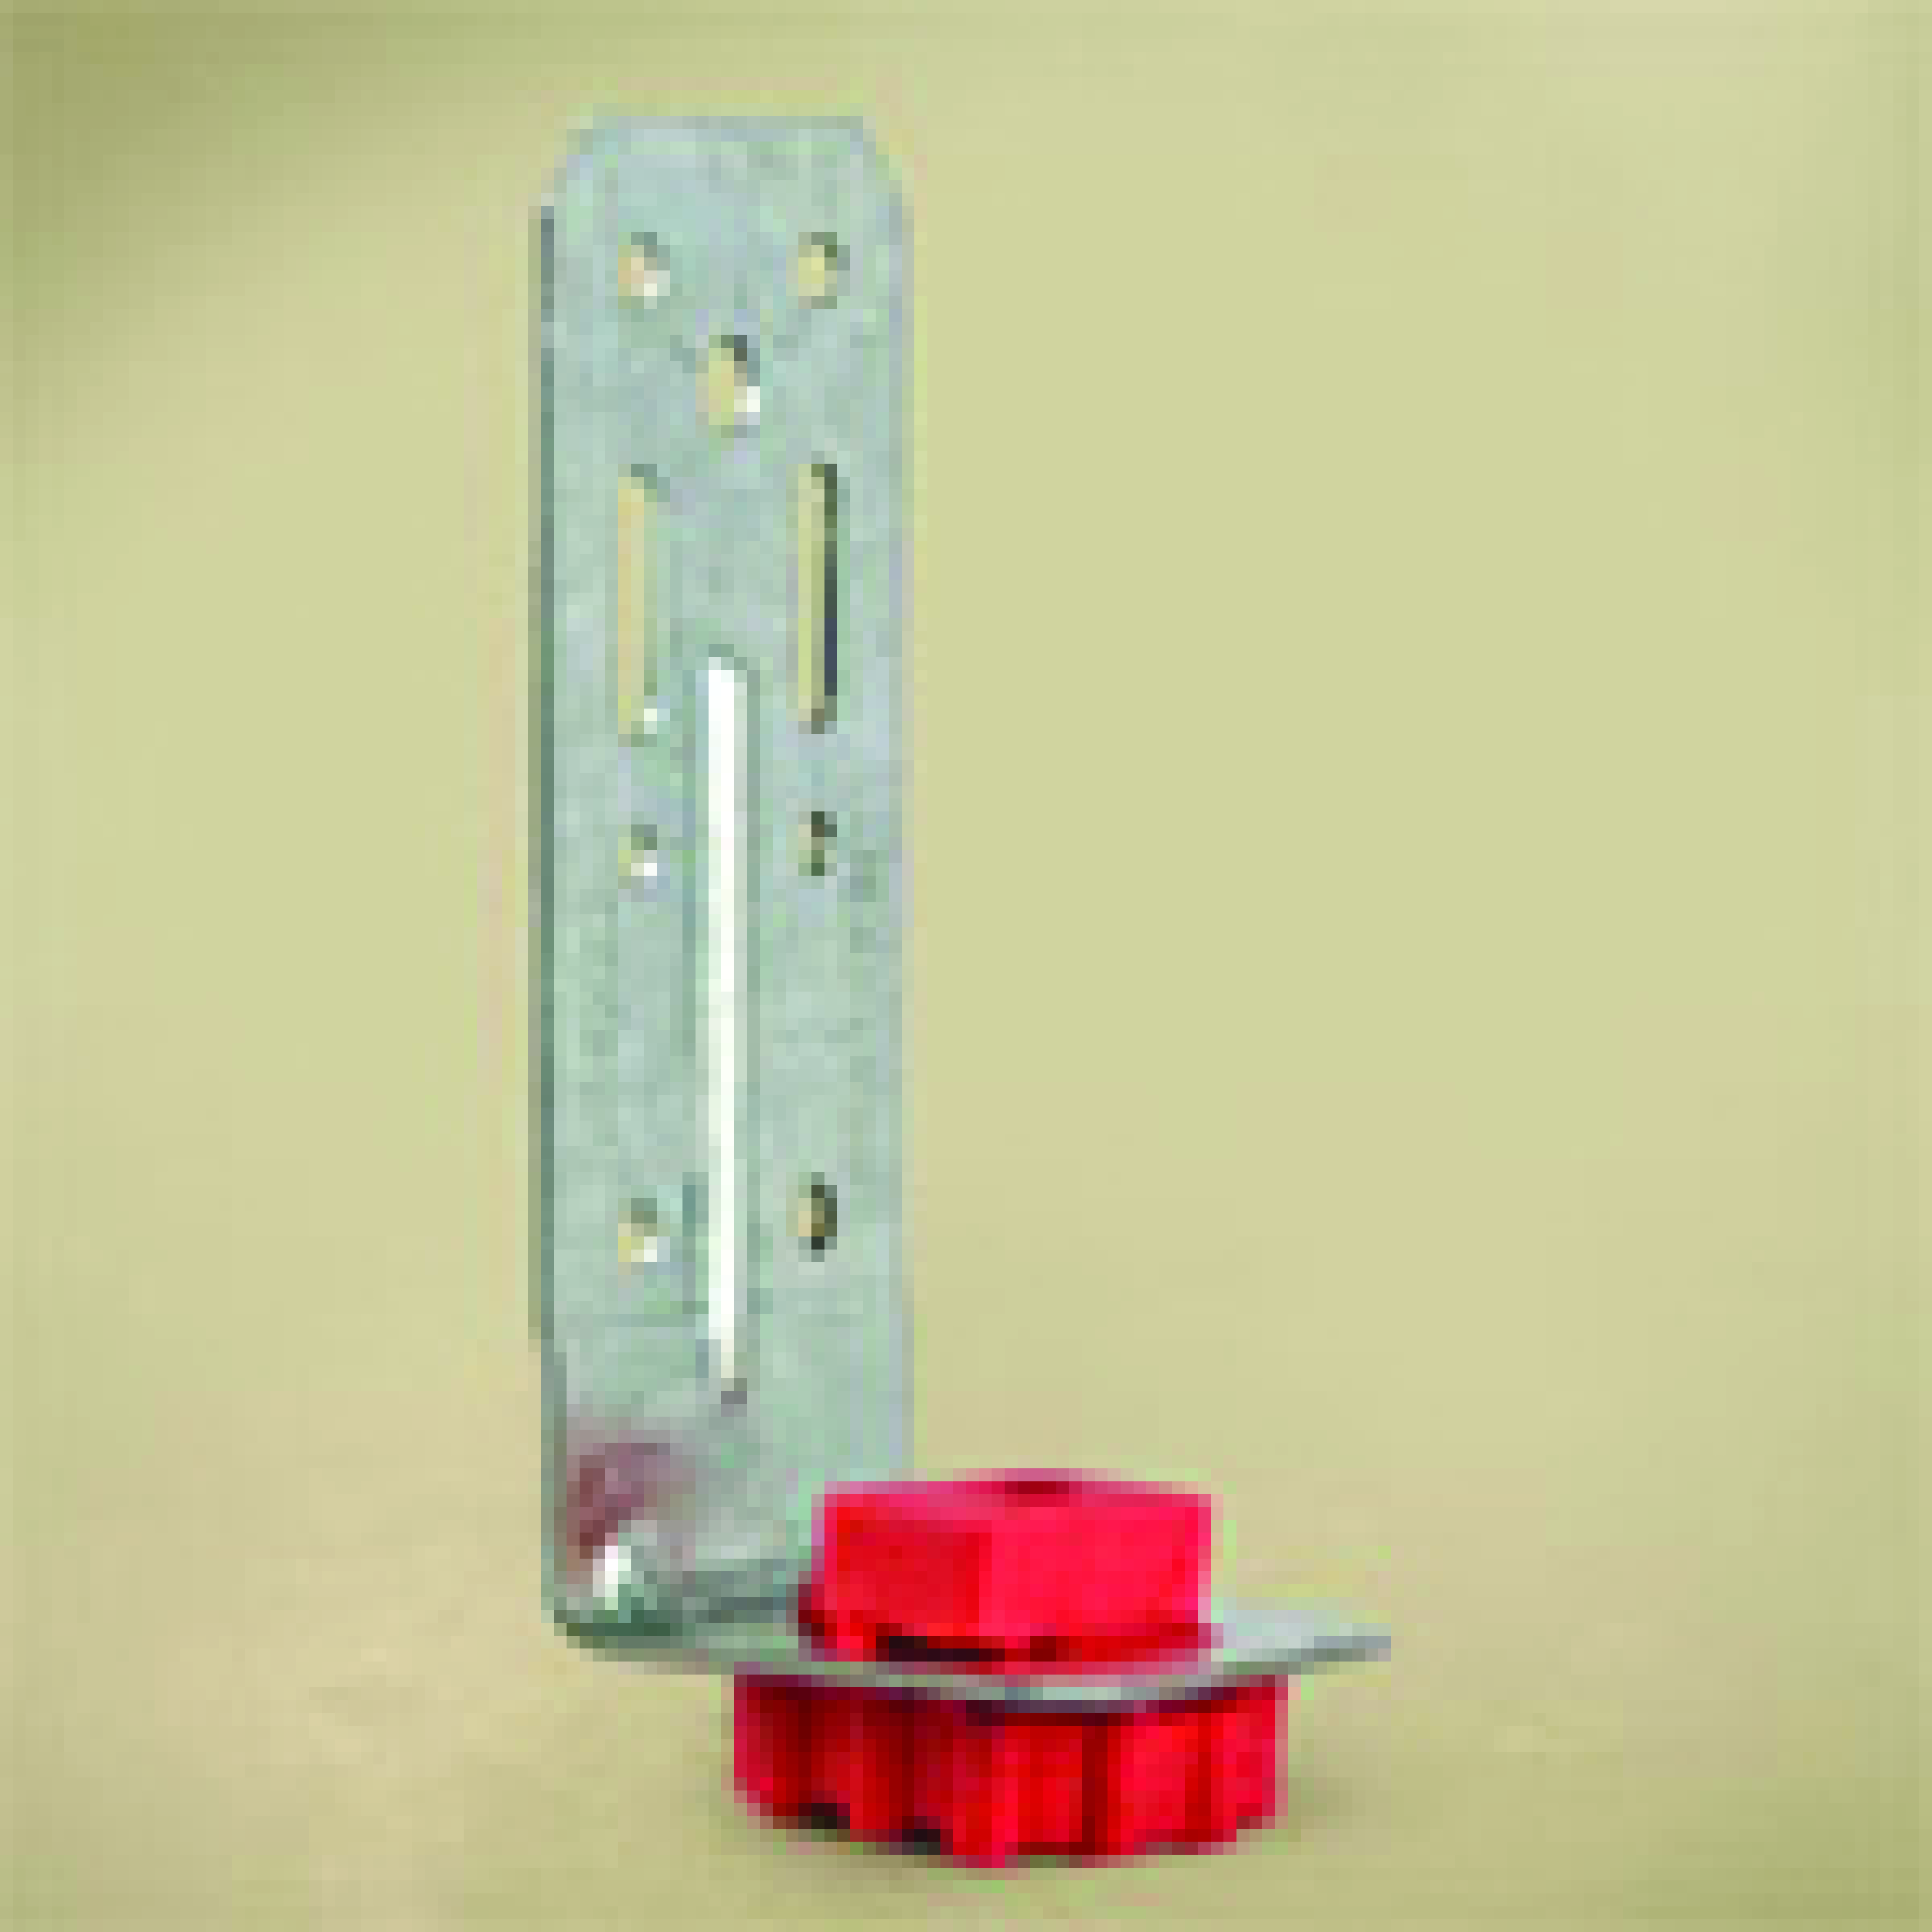 A red piece of metal with a mounting plate.